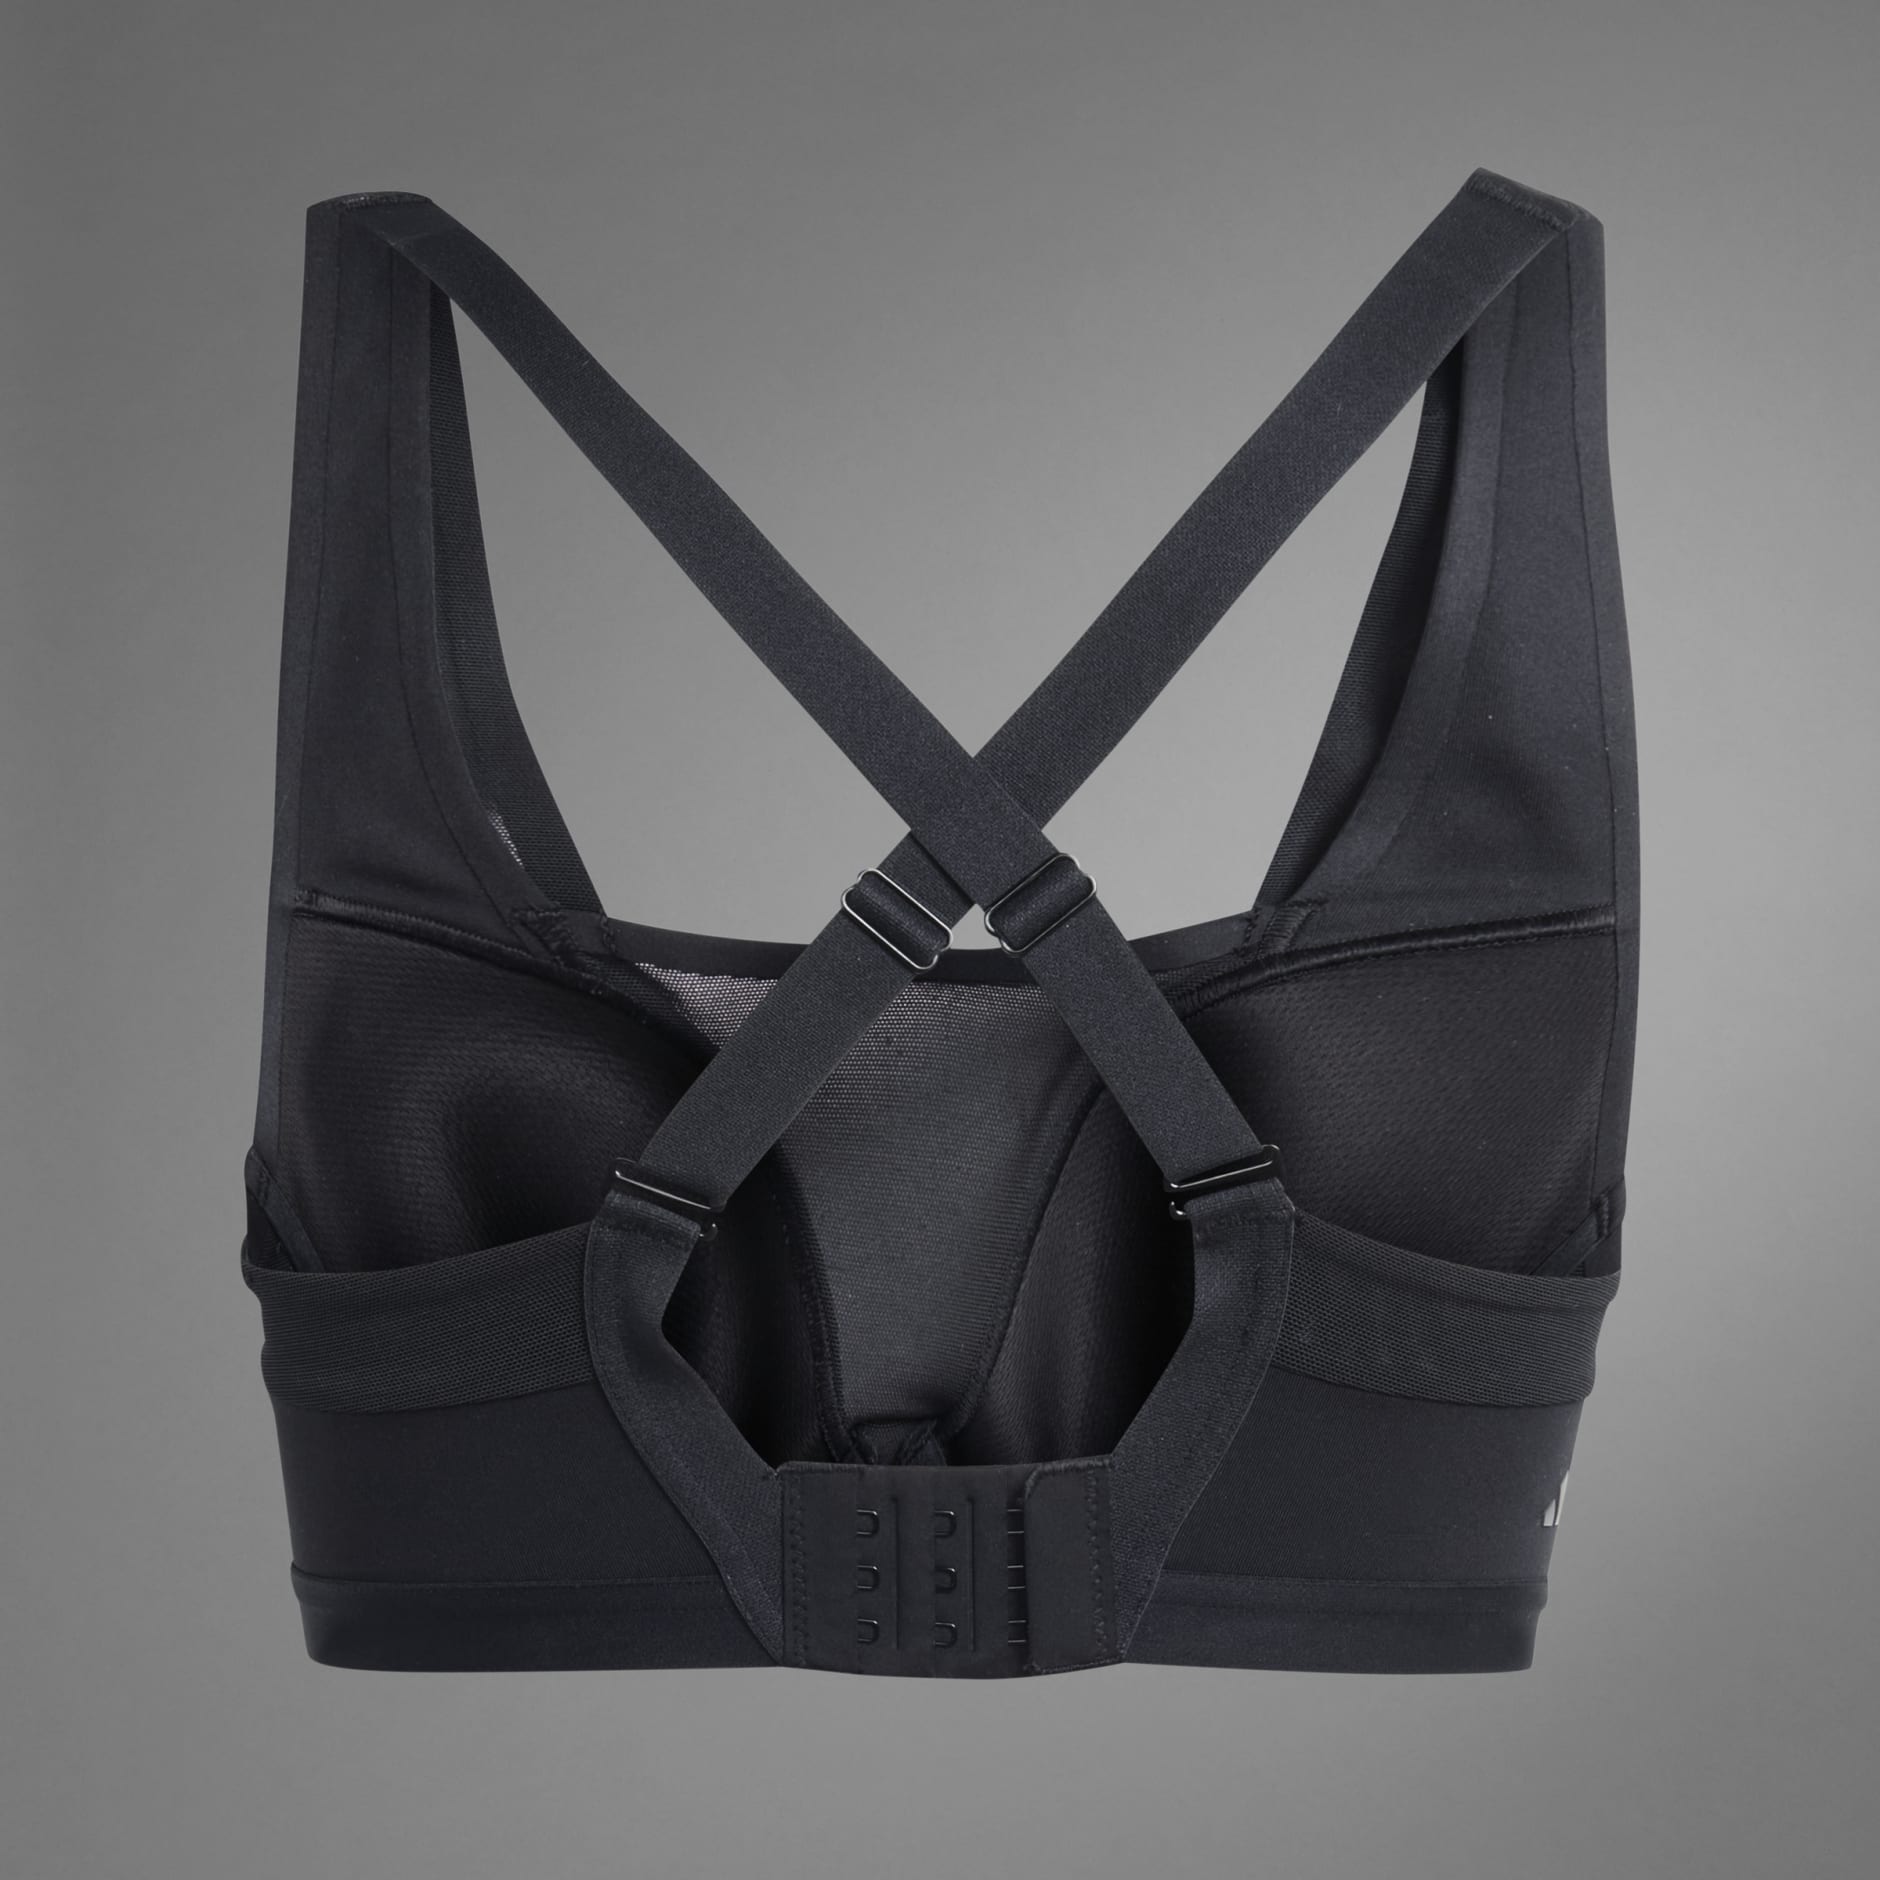 Buy ADIDAS tlrd impact luxe training high-support bra Online